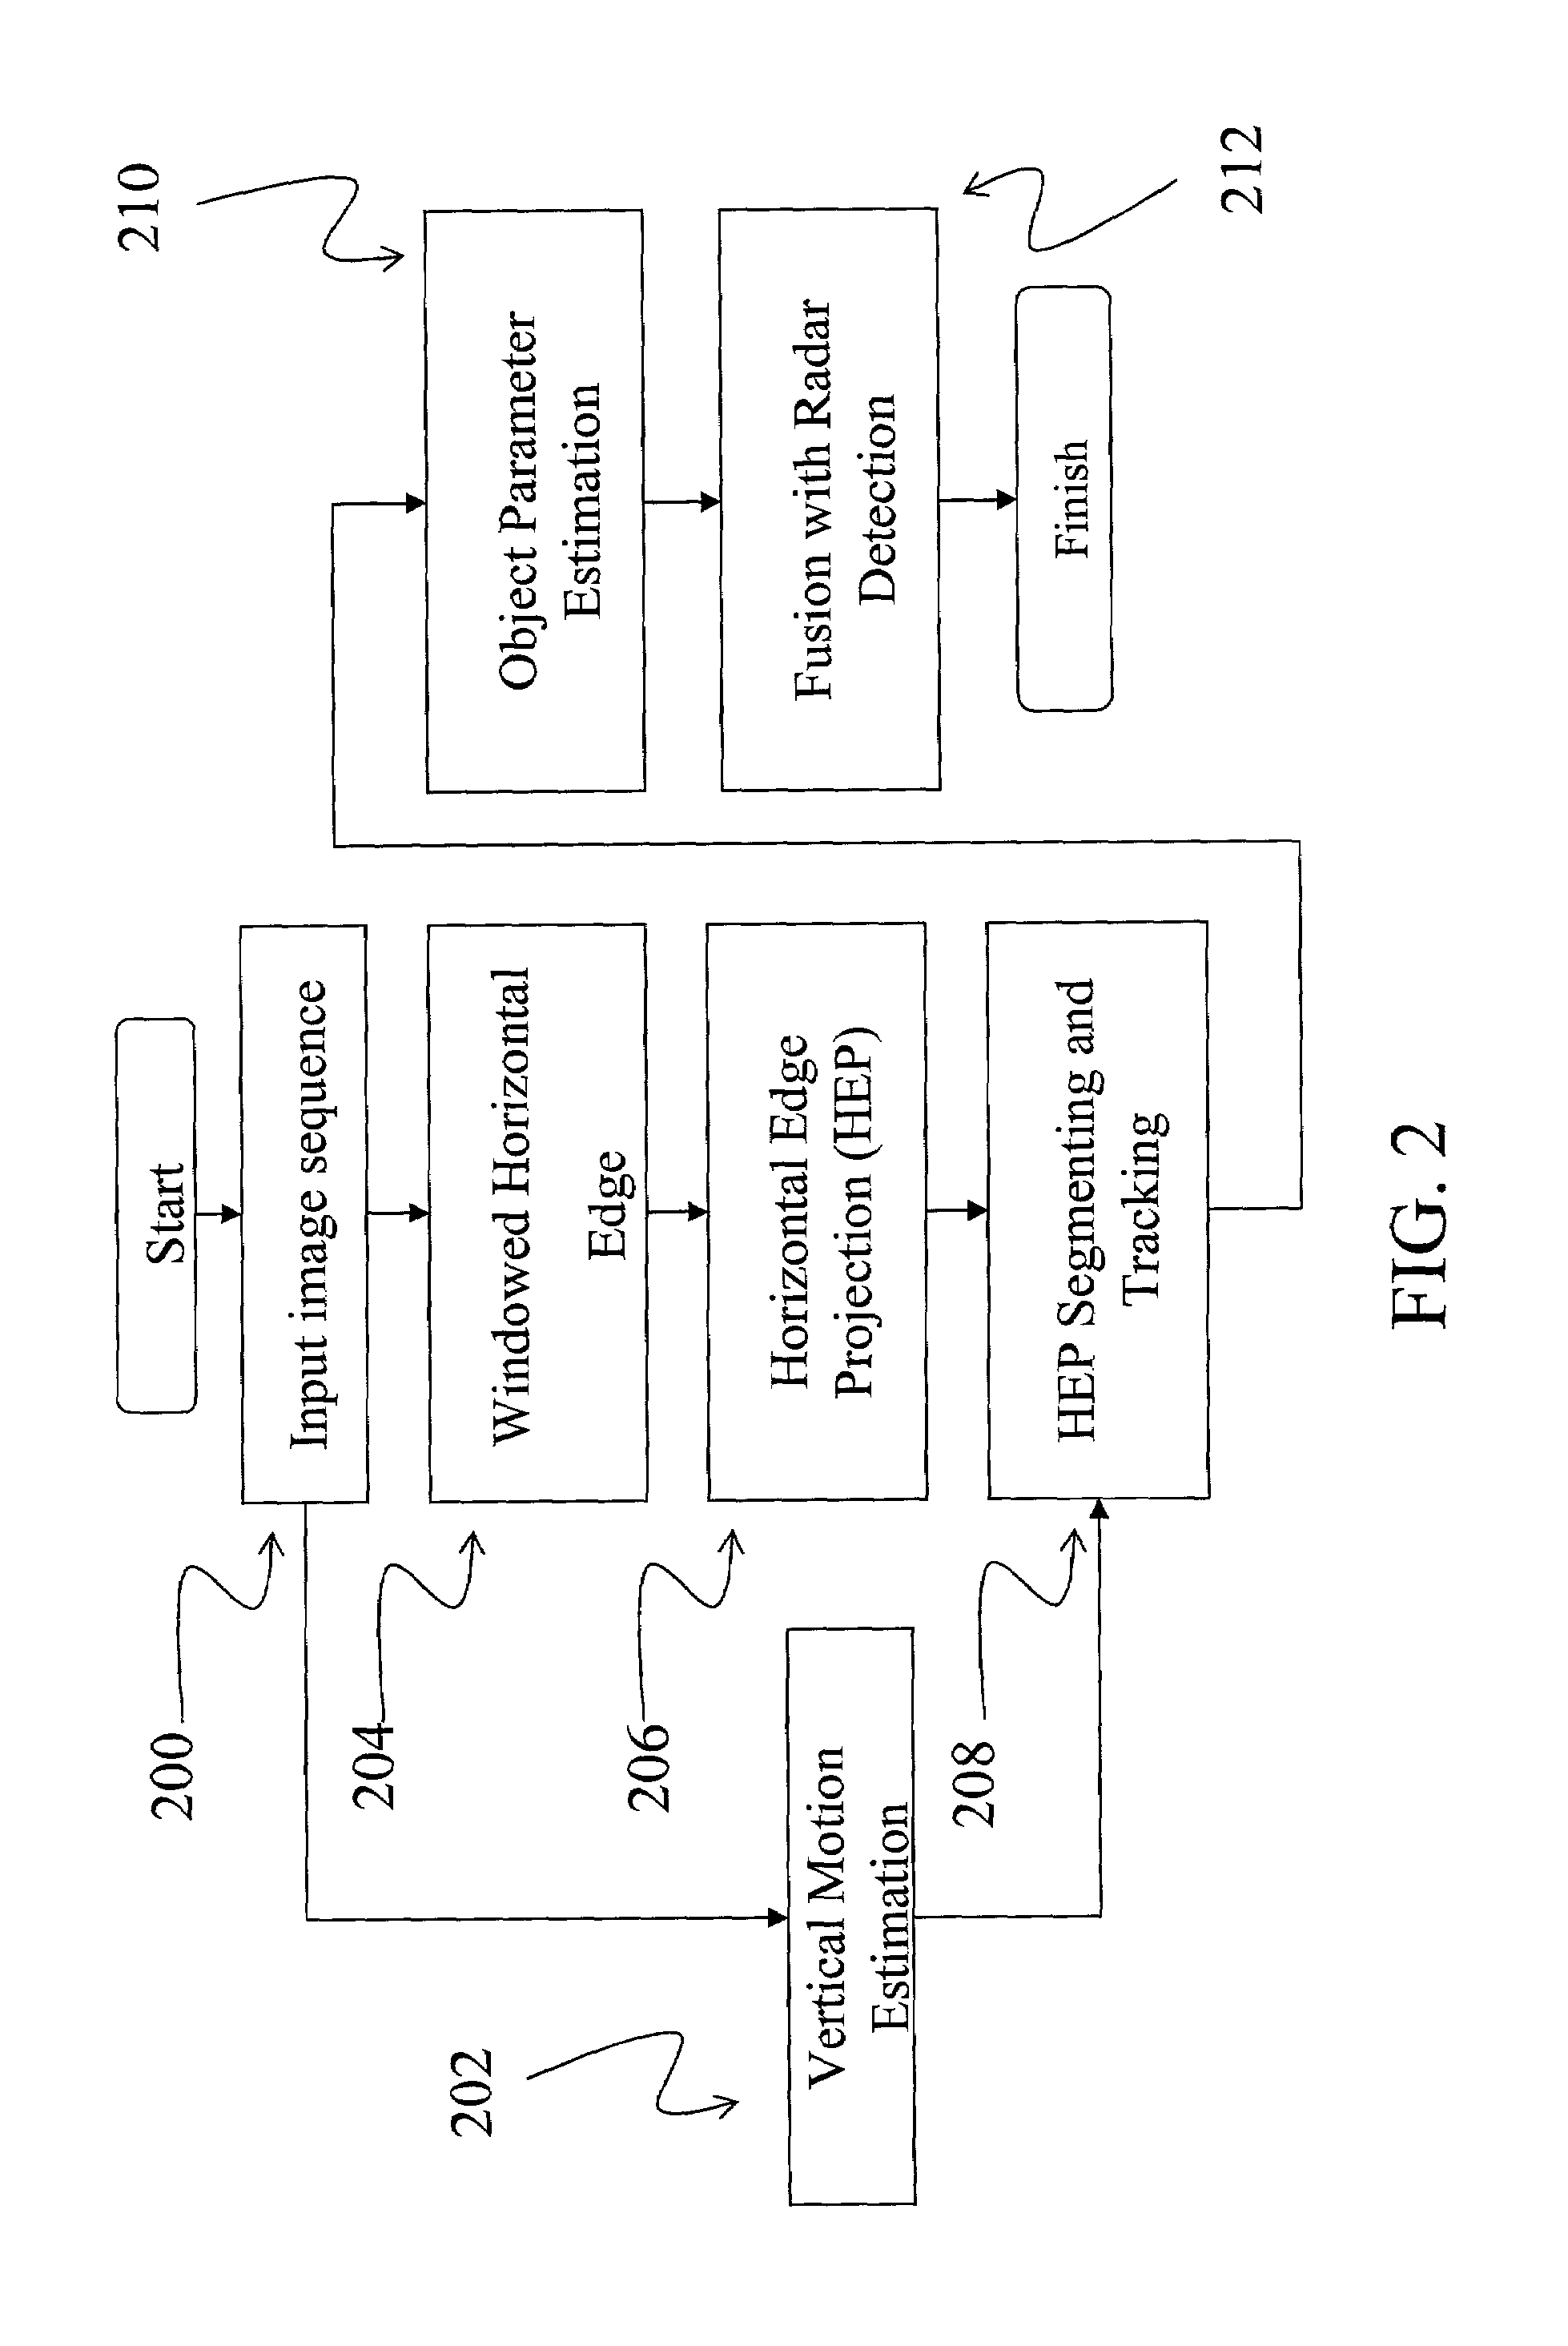 Vision-based highway overhead structure detection system